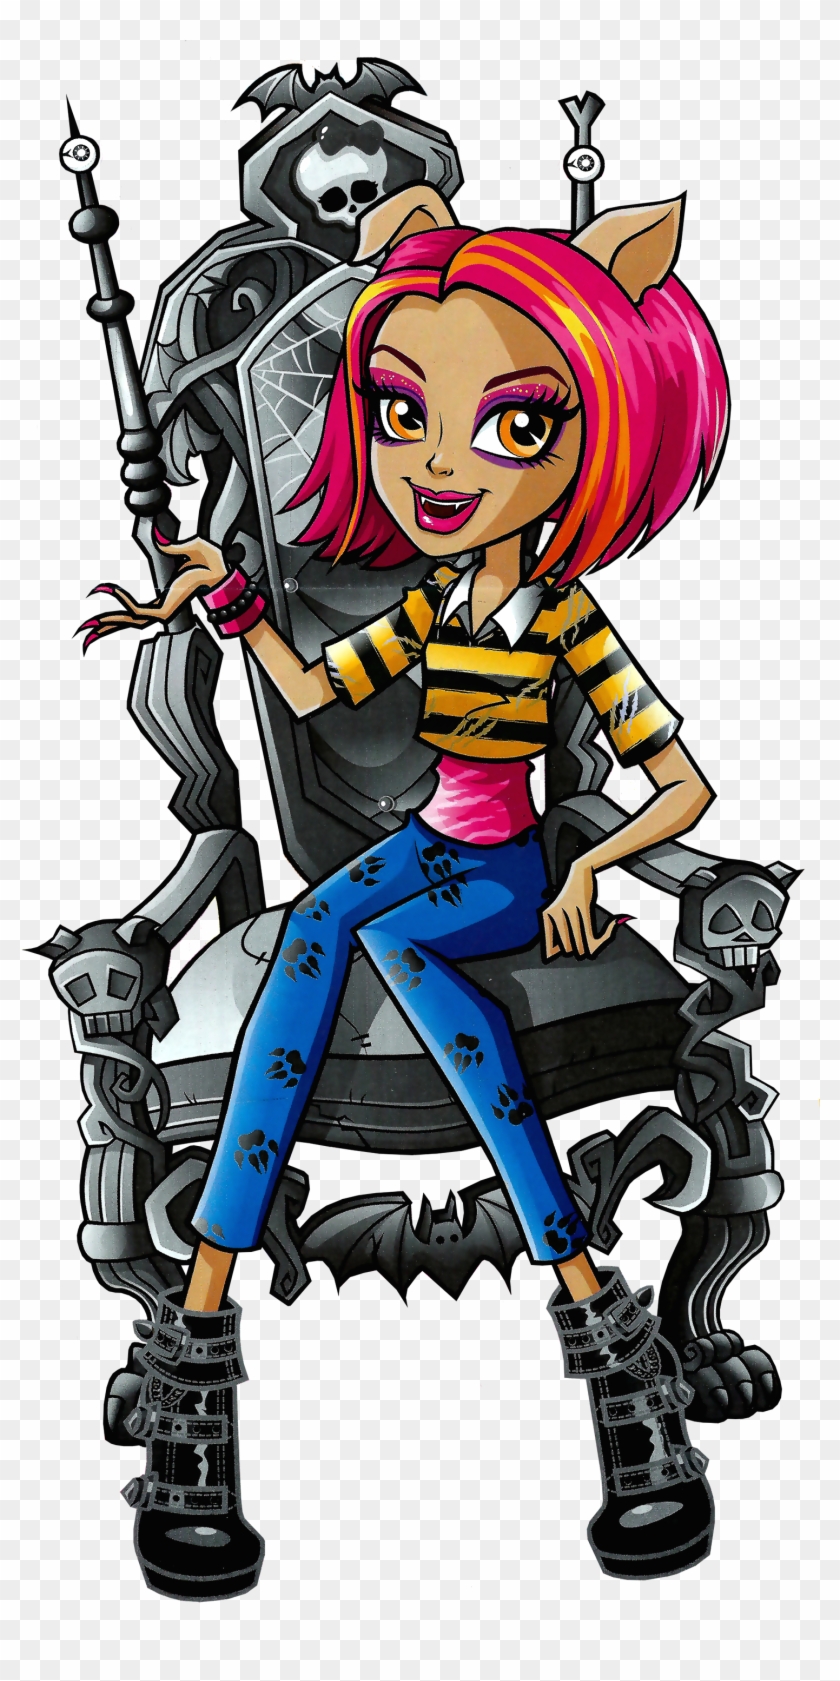 A Pack Of Trouble - Howleen From Monster High #1005220